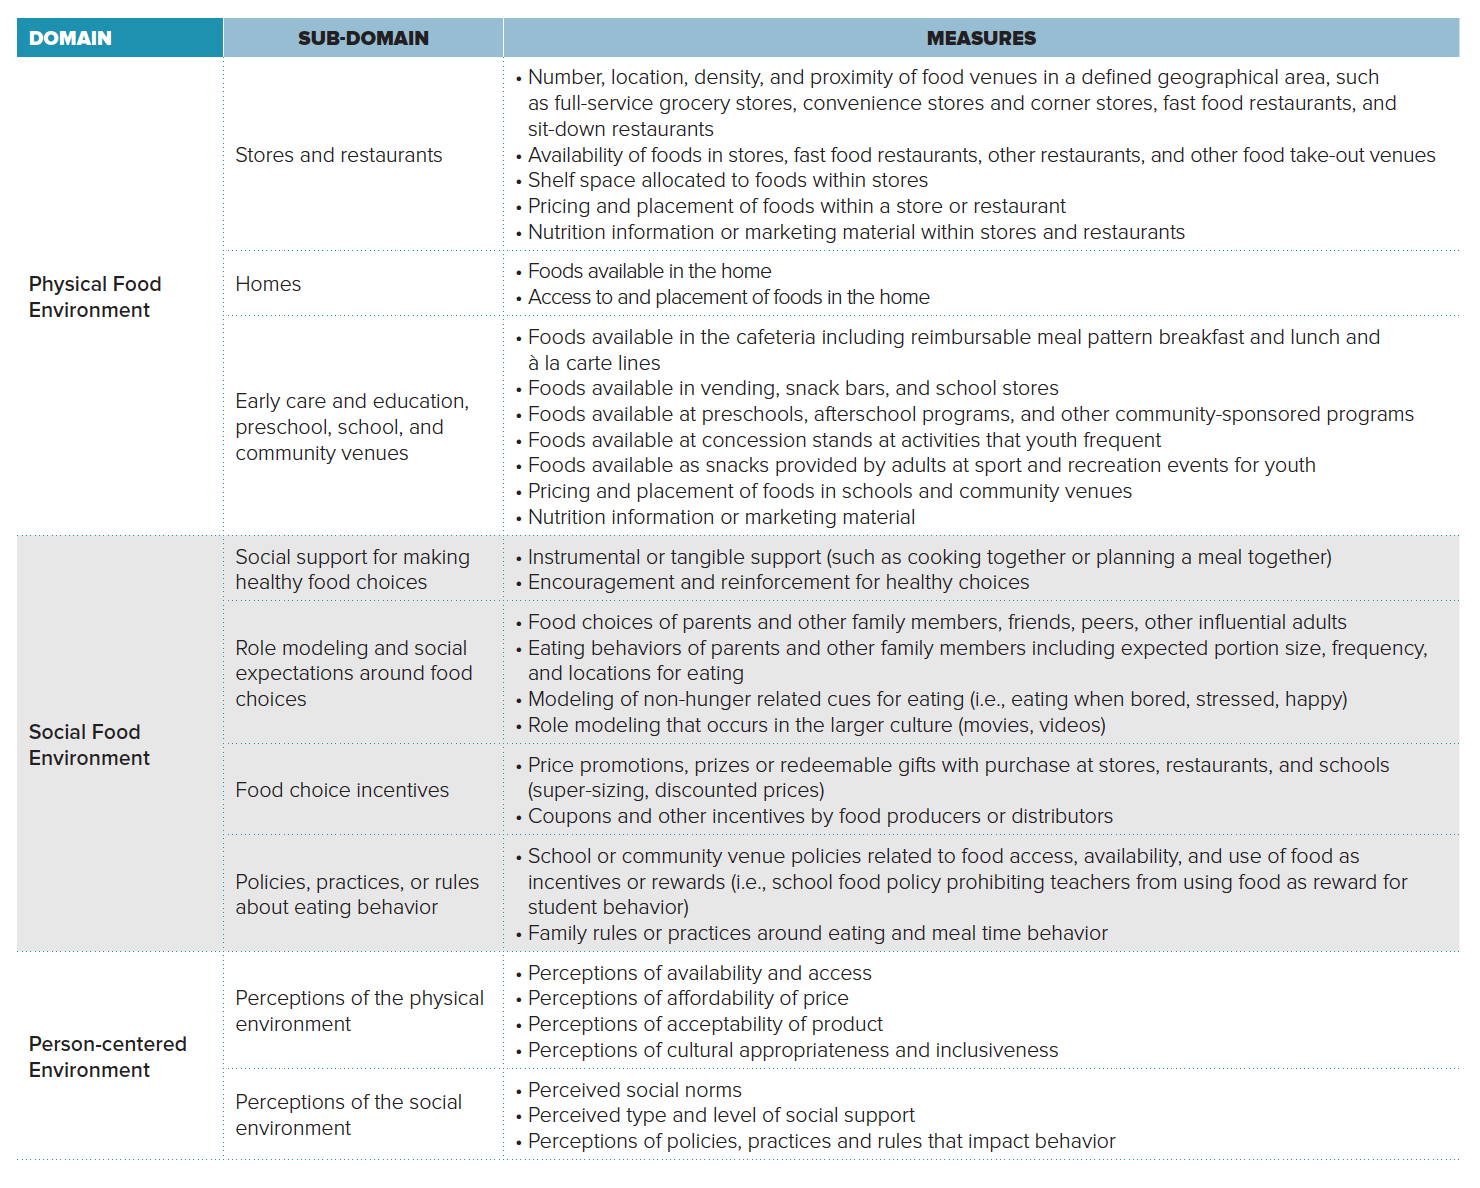 Table 1: Food Environment Domains, Sub-Domains, and Examples of Measures